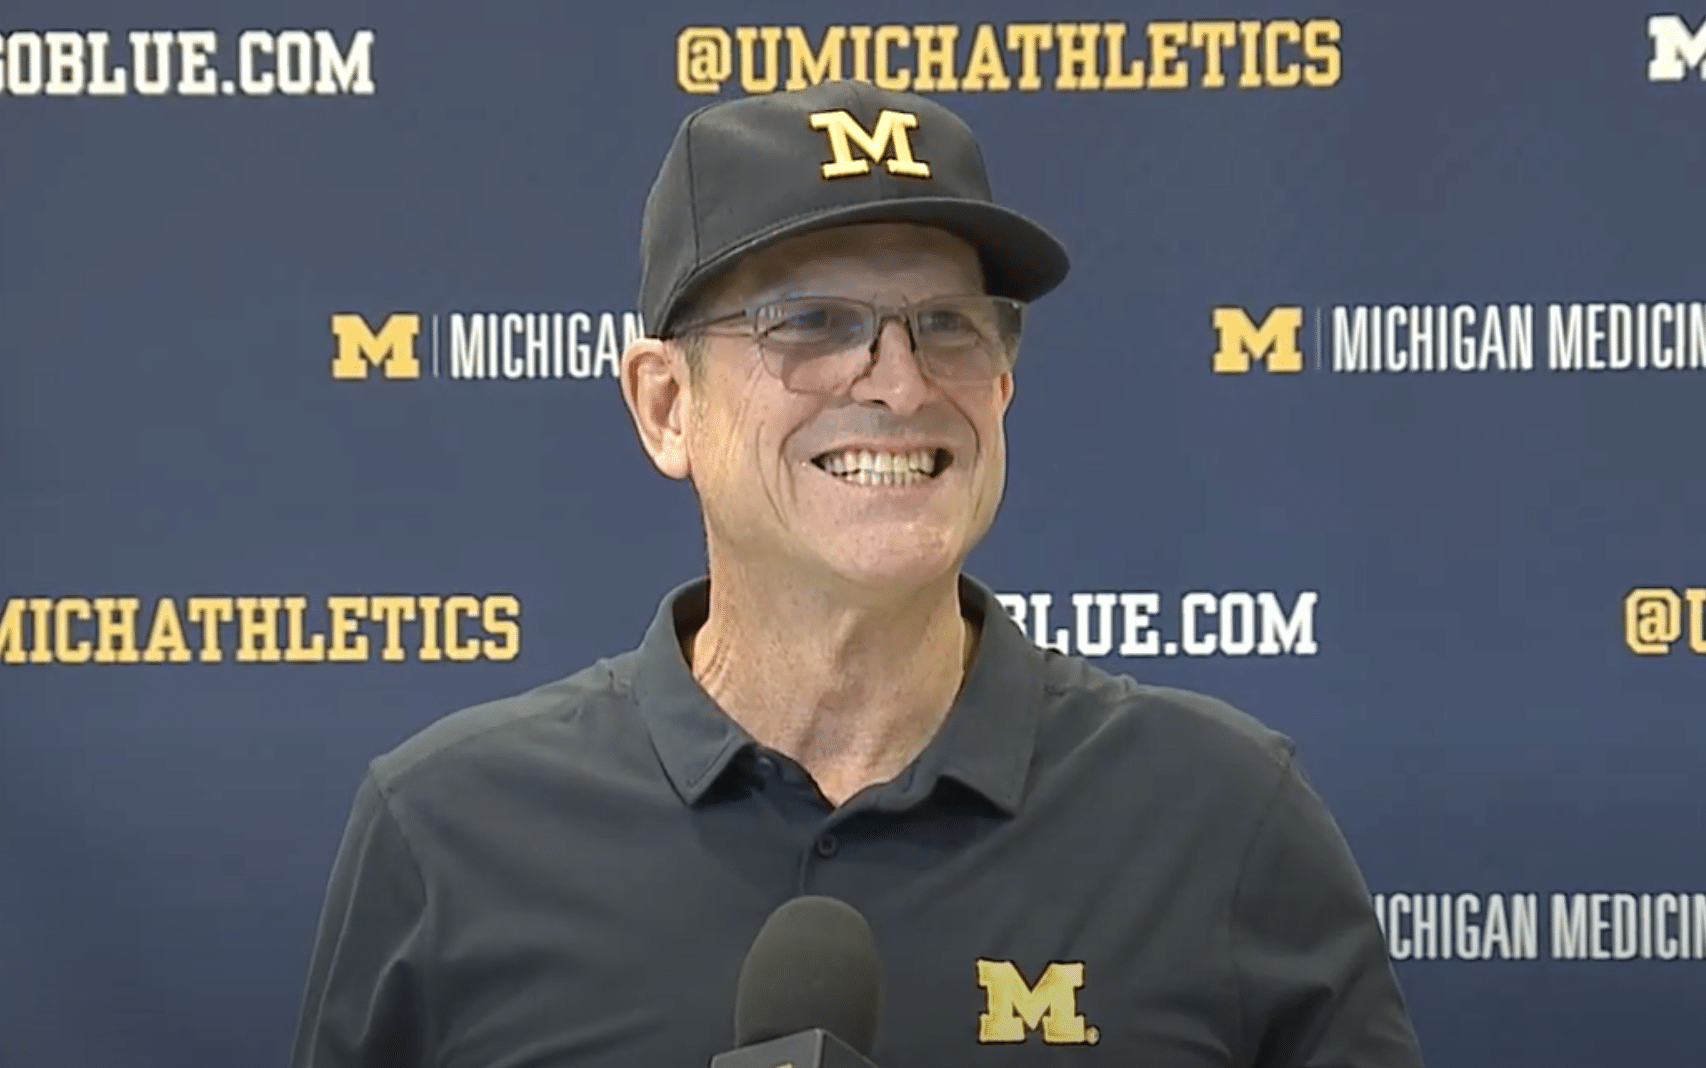 Jim Harbaugh explains why Michigan Football Jim Harbaugh compares Michigan locker room Jim Harbaugh praises Sherrone Moore Will Jim Harbaugh receive his bonuses for 2023 Los Angeles Chargers interested in hiring Jim Harbaugh Jim Harbaugh Talks About J.J. McCarthy's Growth at Michigan Jim Harbaugh Has Perfect Answer to Question About His Future Will He Stay or Go? New Developments in Jim Harbaugh's Career with Michigan Revealed